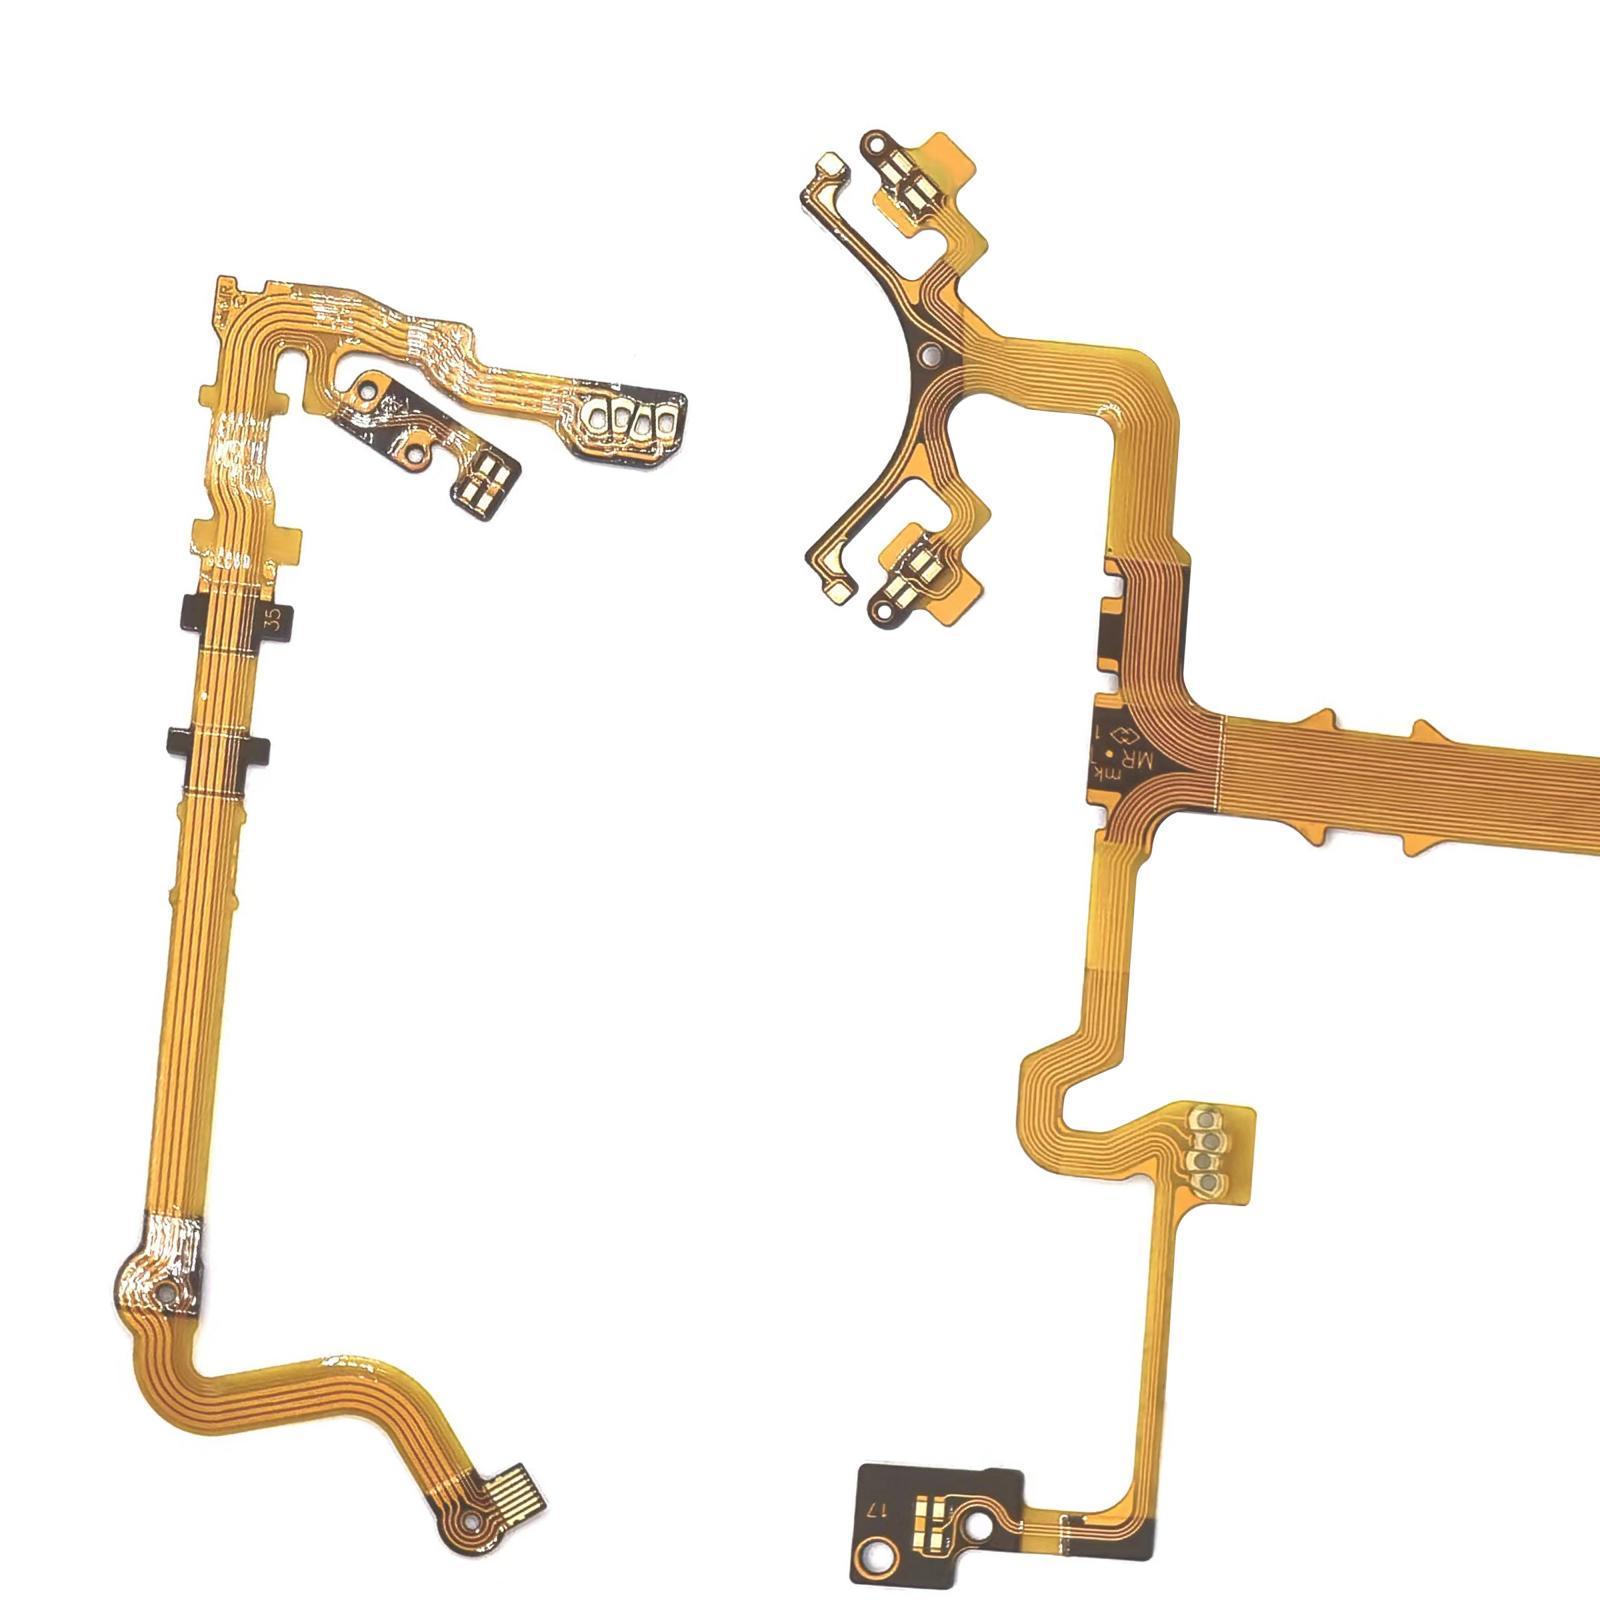 2x Lens Focus Anti Cable Shockproof Flex Cable for 15-45 mm